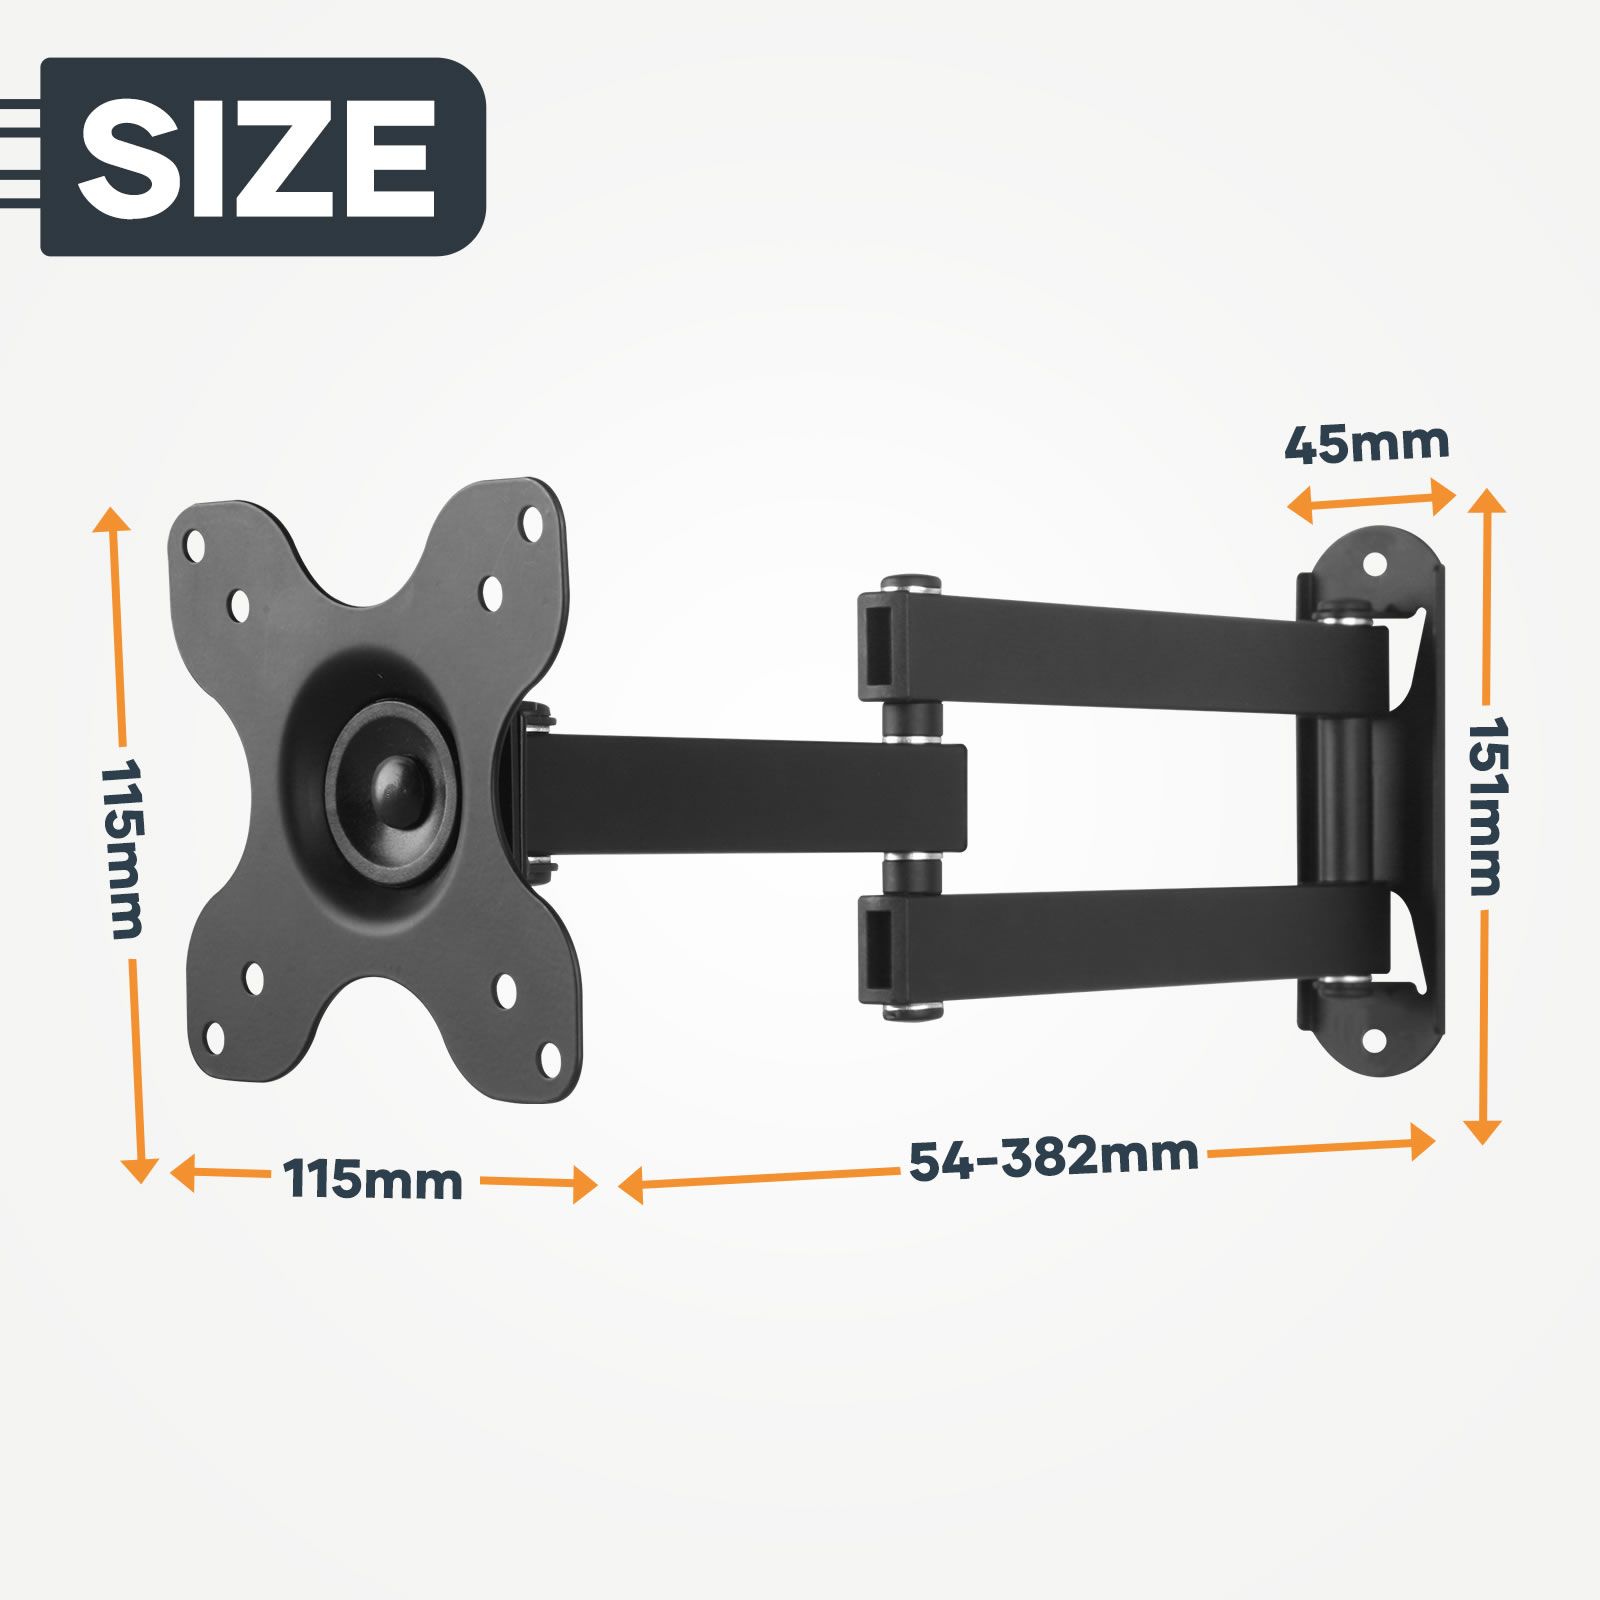 Wall TV Stand Bracket Television Mount Swivel Mounting Holder Tilt Hanger Base Black Fits 13 to 30 Inches